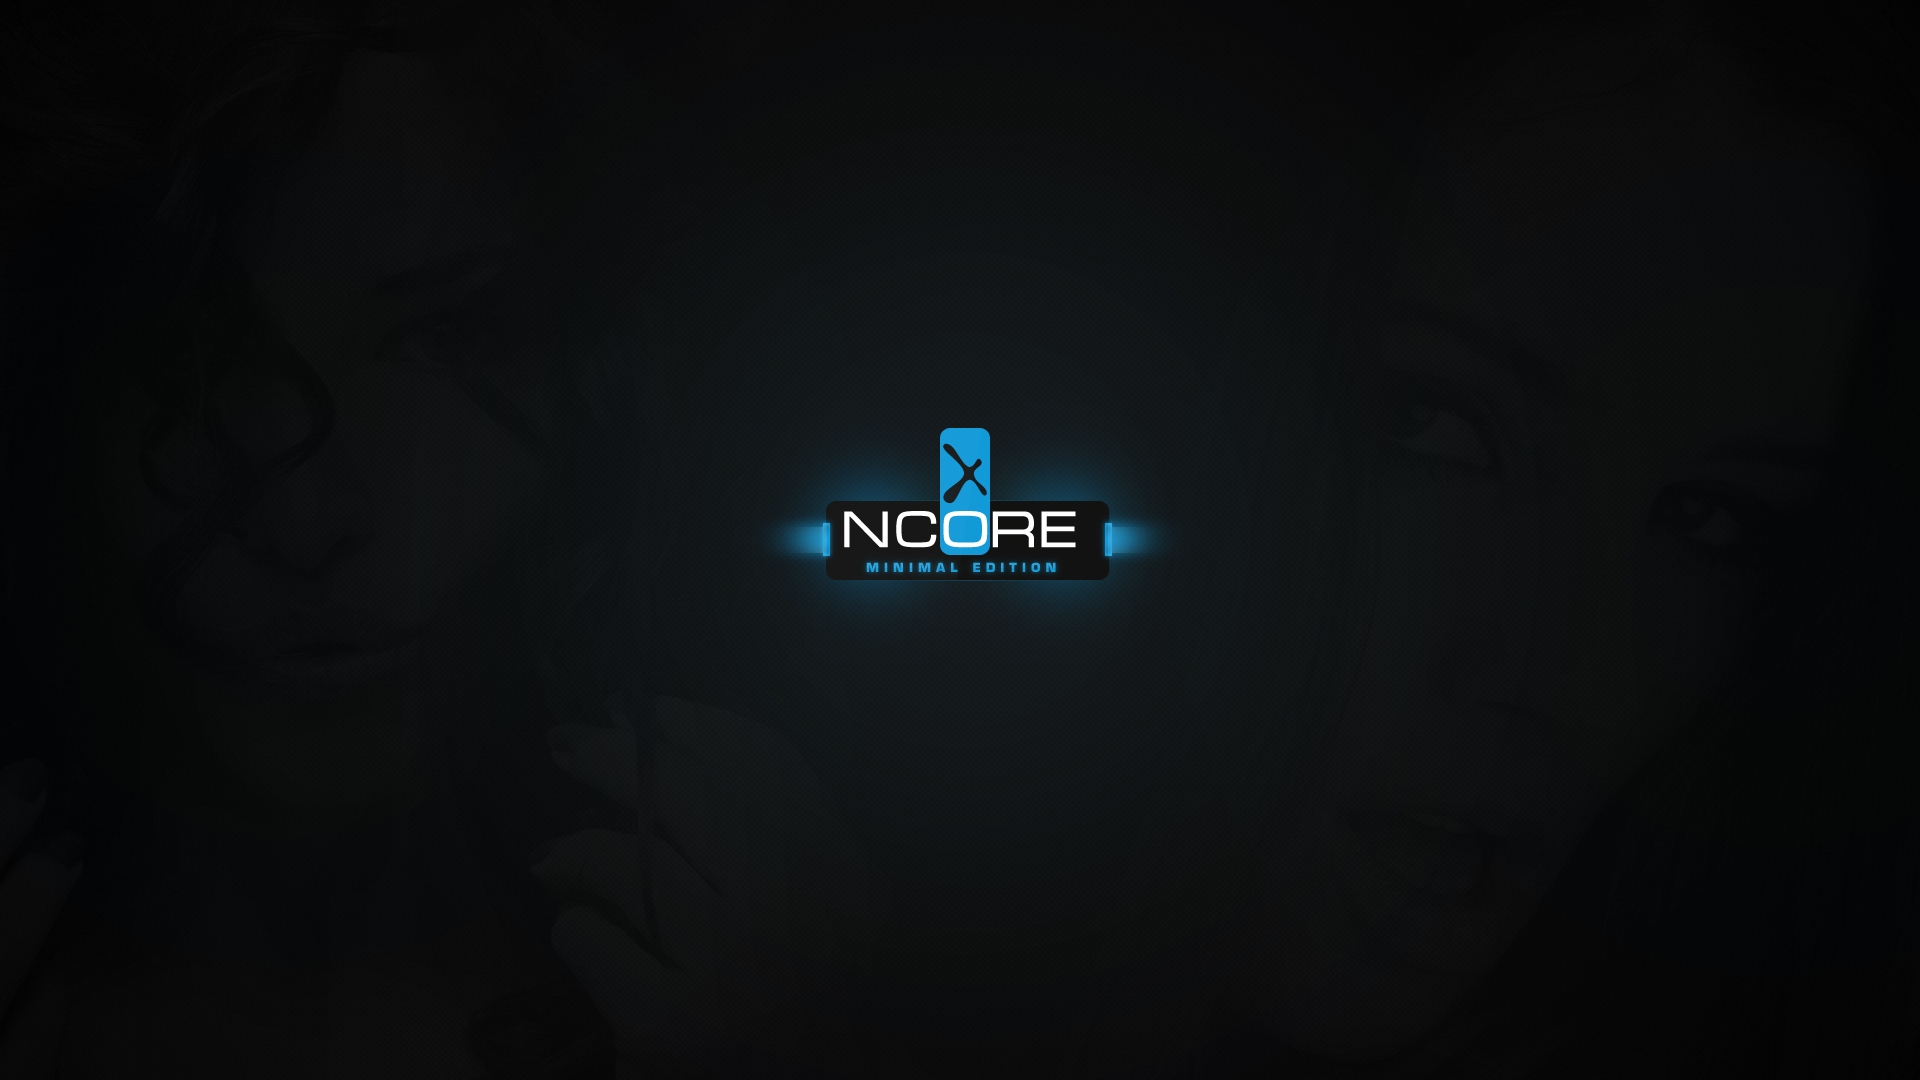 Ncore Edition for 1920 x 1080 HDTV 1080p resolution